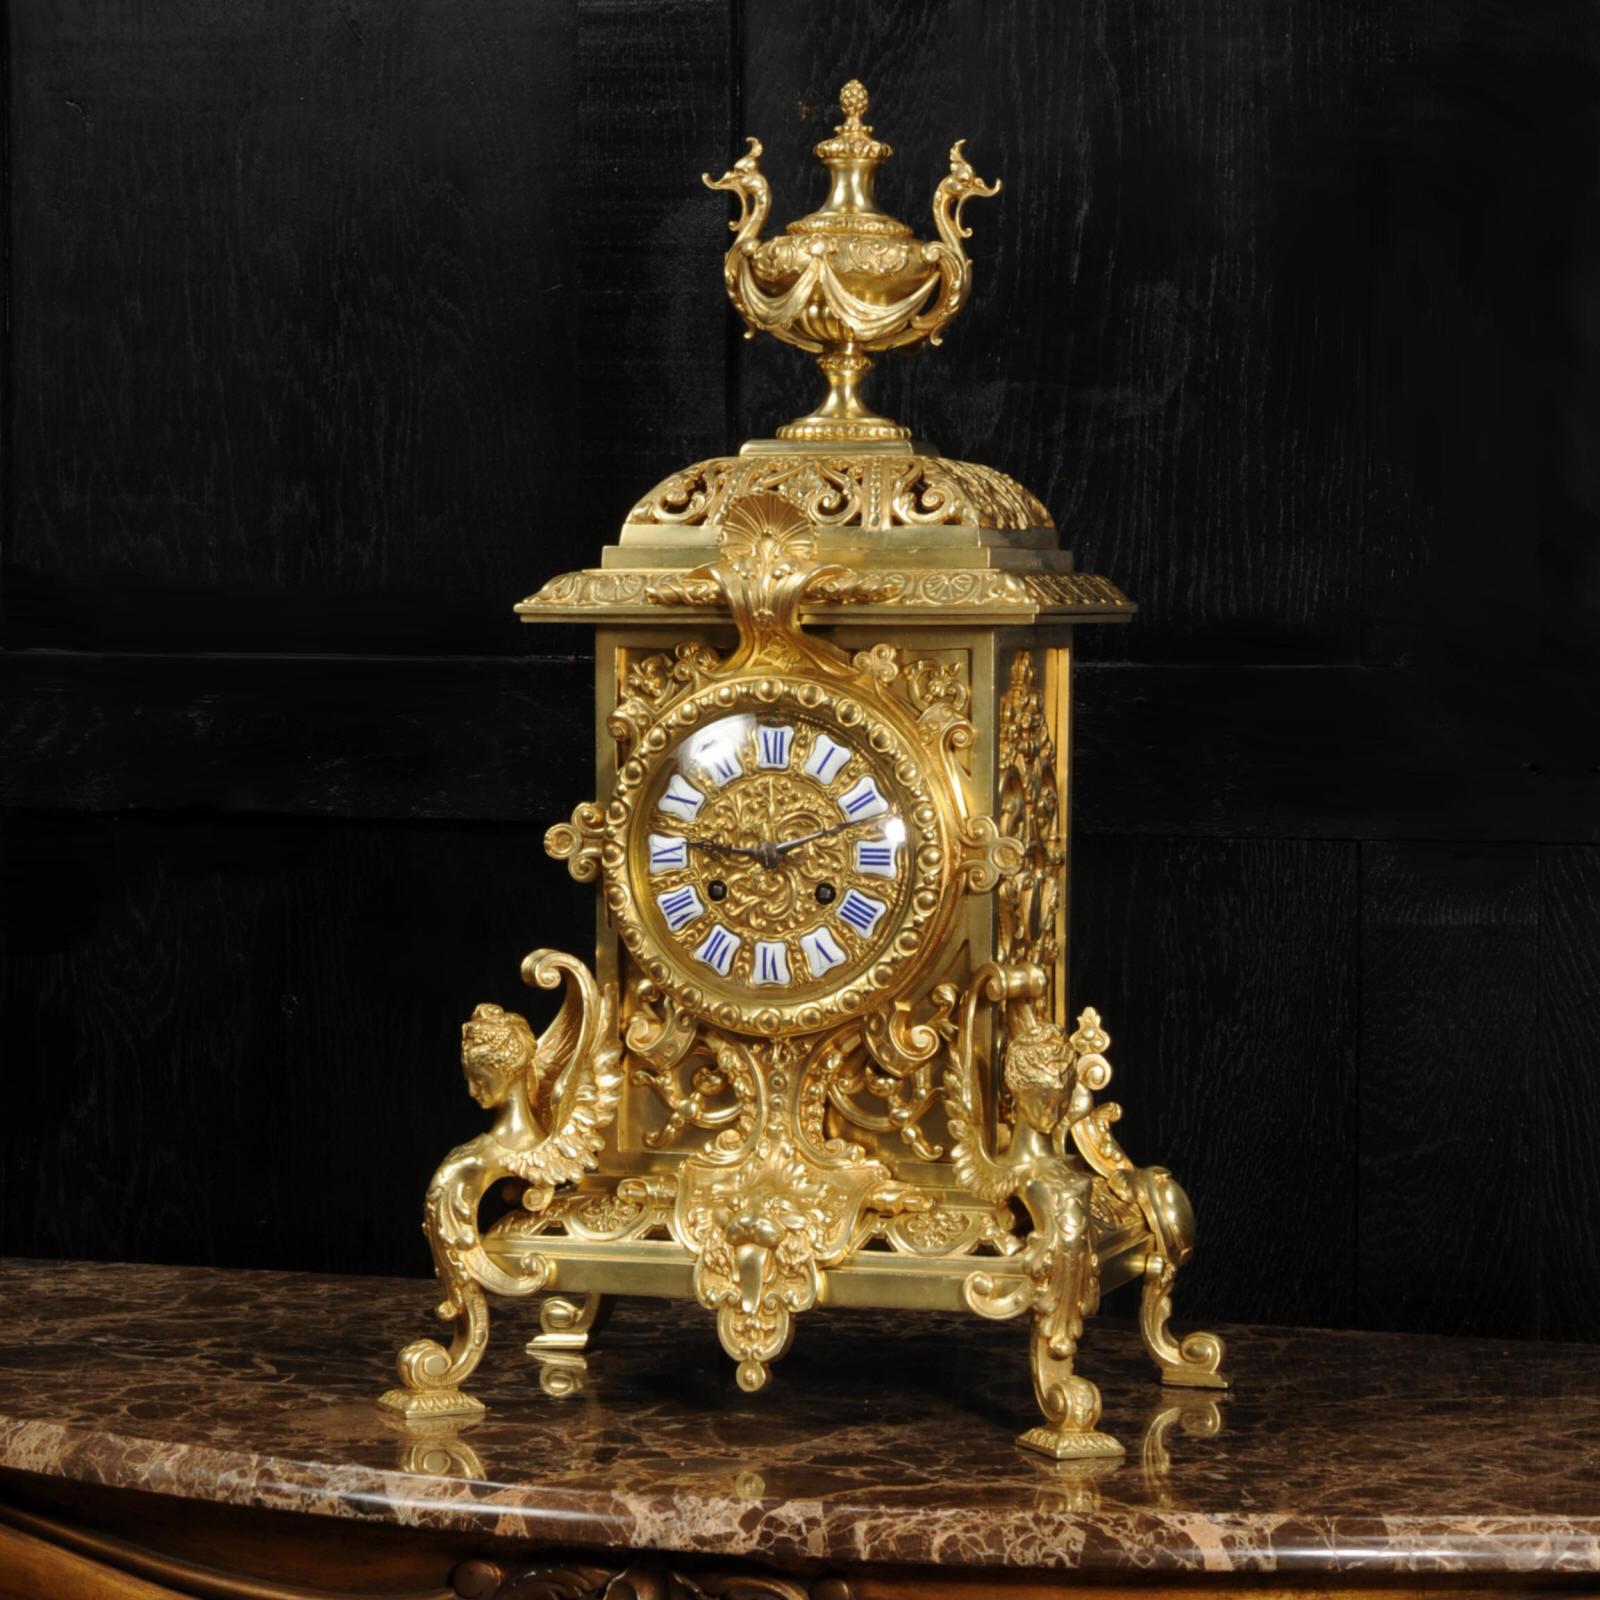 A very large and beautifully detailed and finished original antique French gilt bronze clock. It is Baroque in style, architectural in shape with a fretted bell top with Anthemion Frieze below. Featuring winged goddesses, a lions mask and an